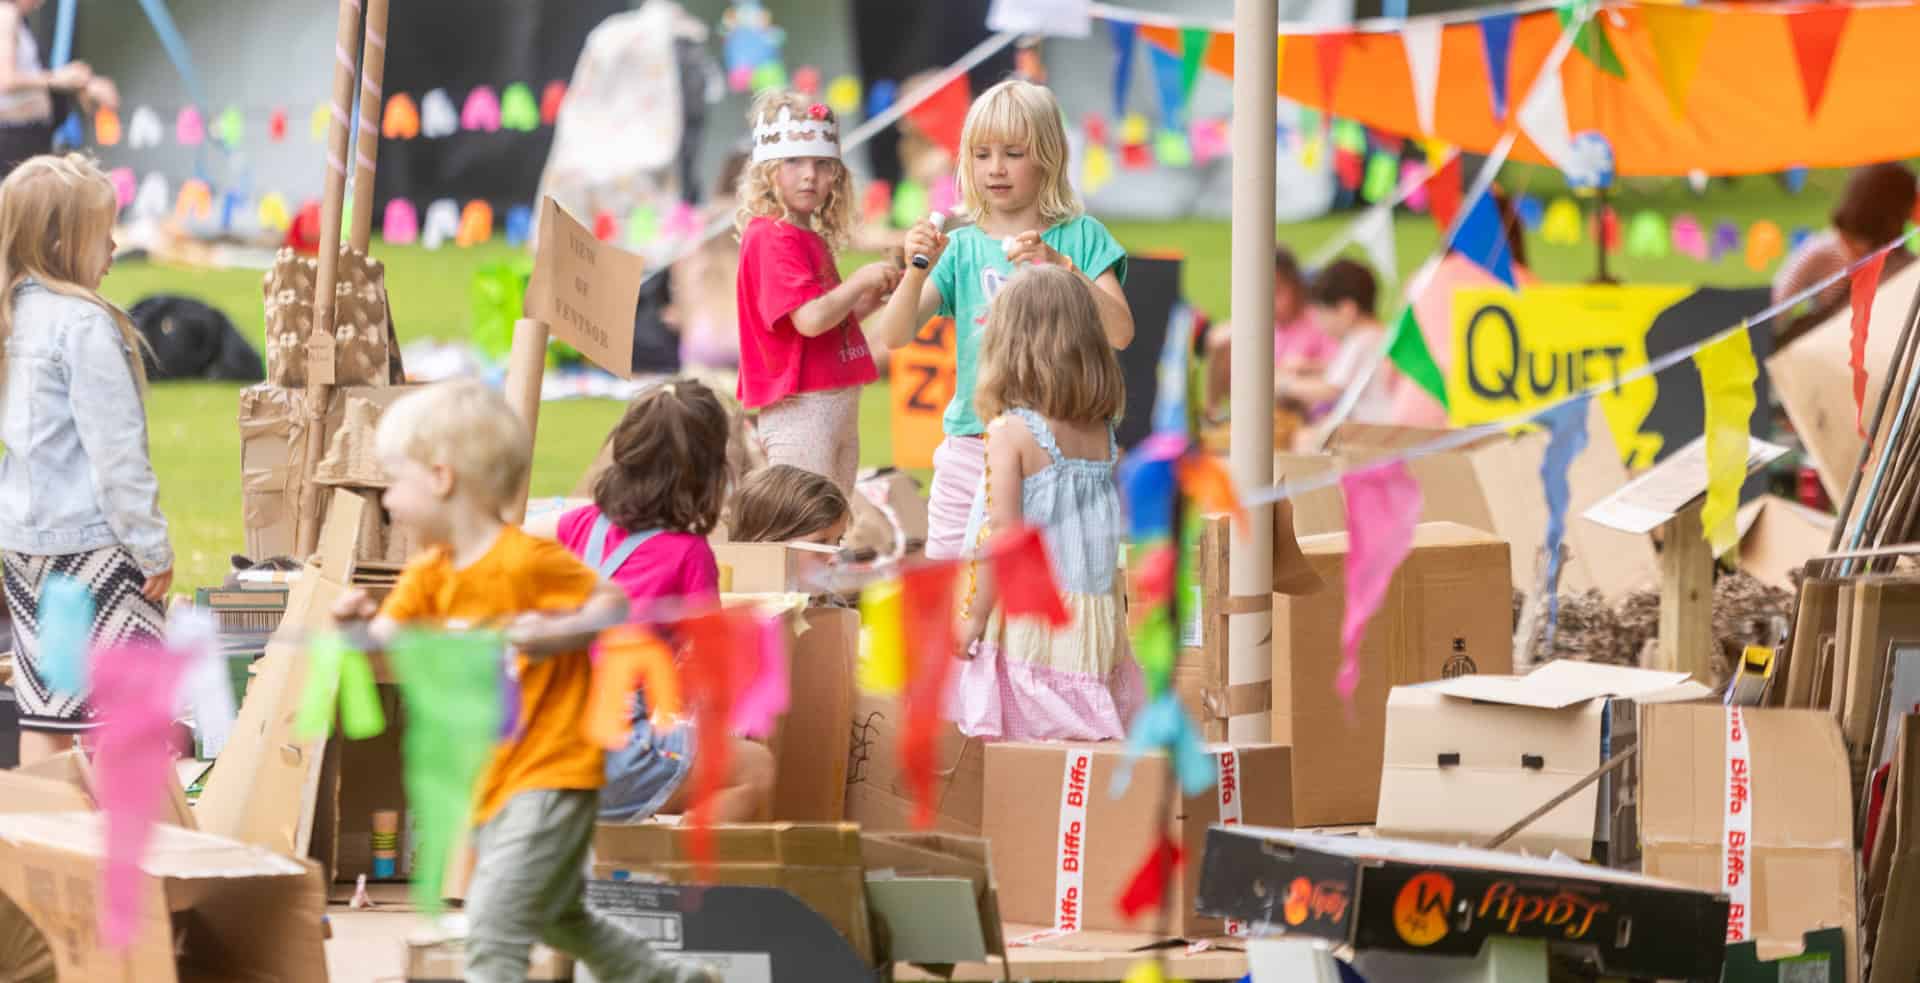 Children surrounded by cardboard in the park